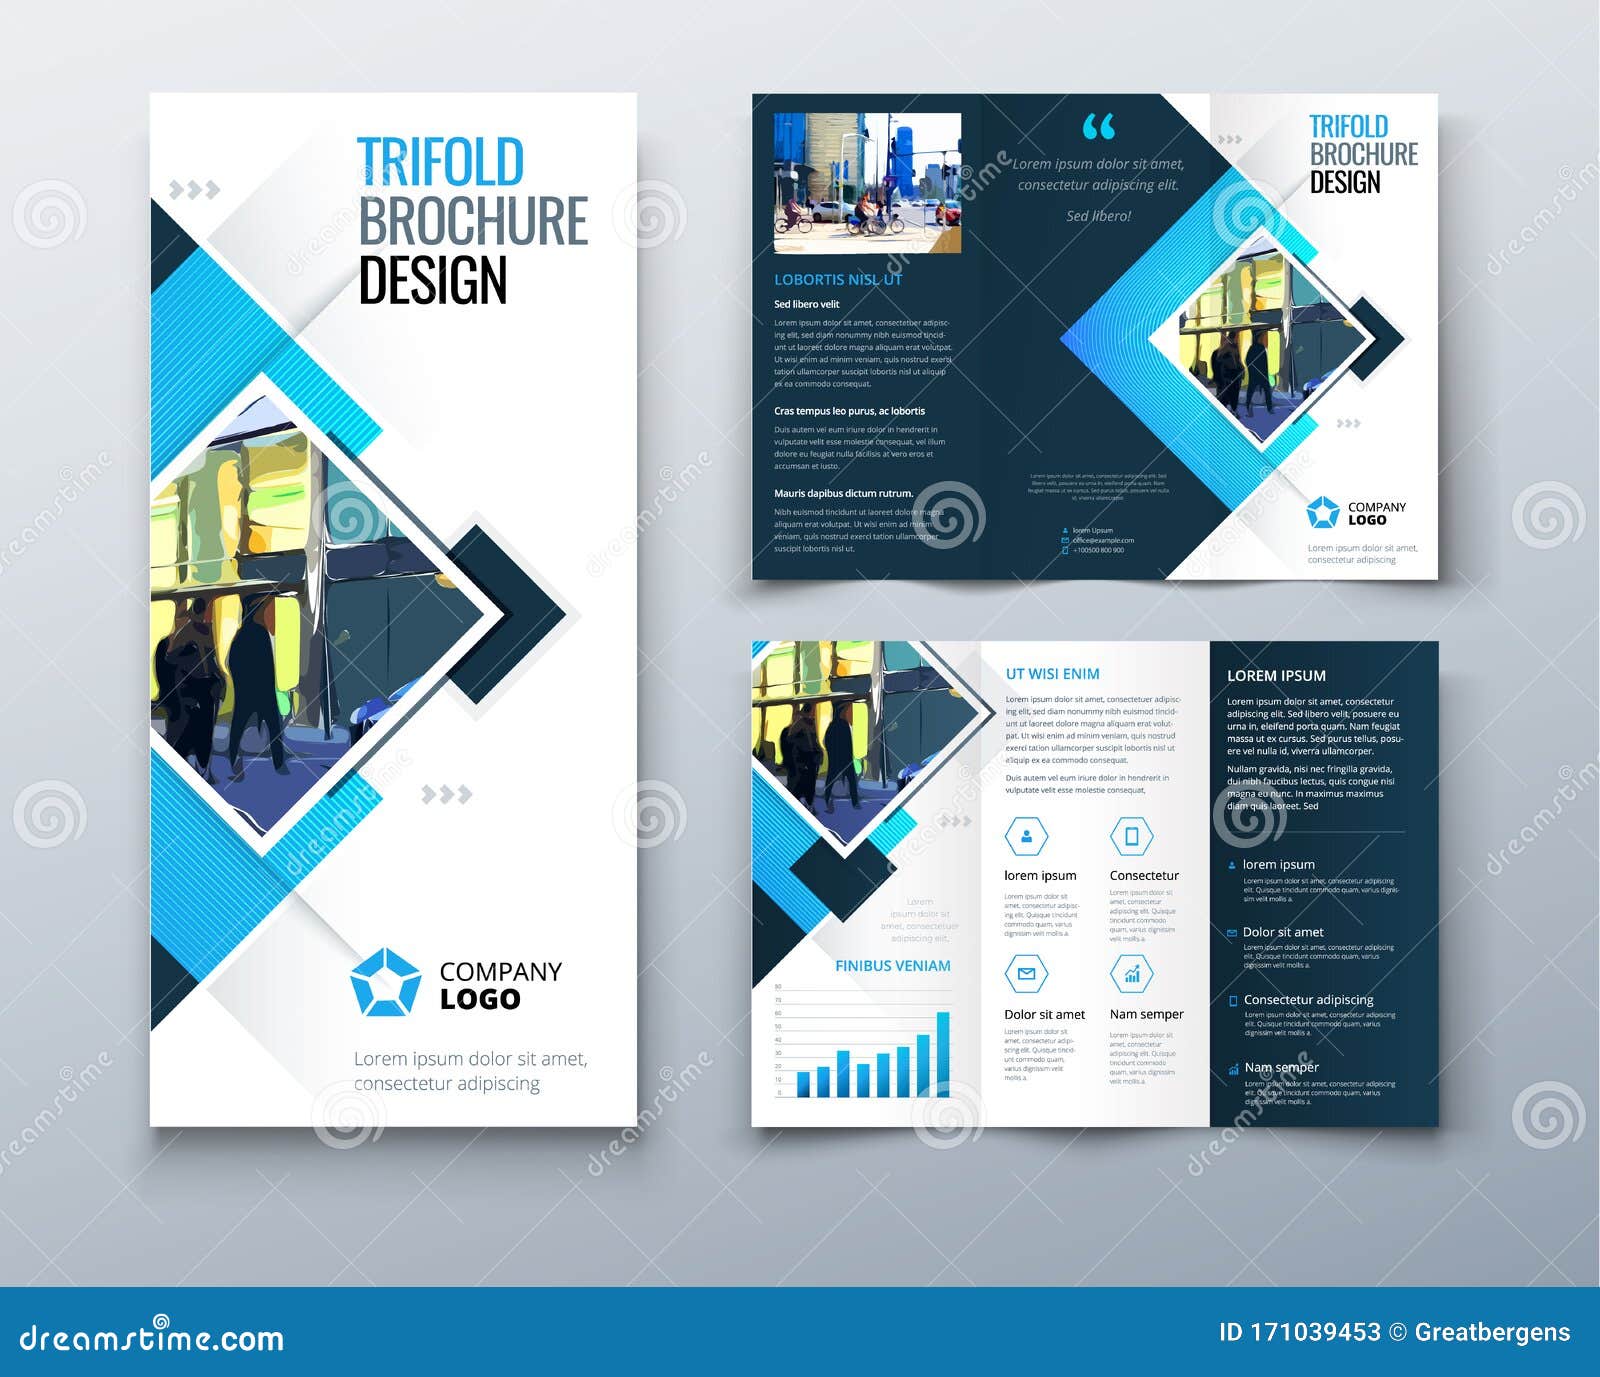 Trifold Brochure Design with Square Shapes, Corporate Business In Free Tri Fold Business Brochure Templates